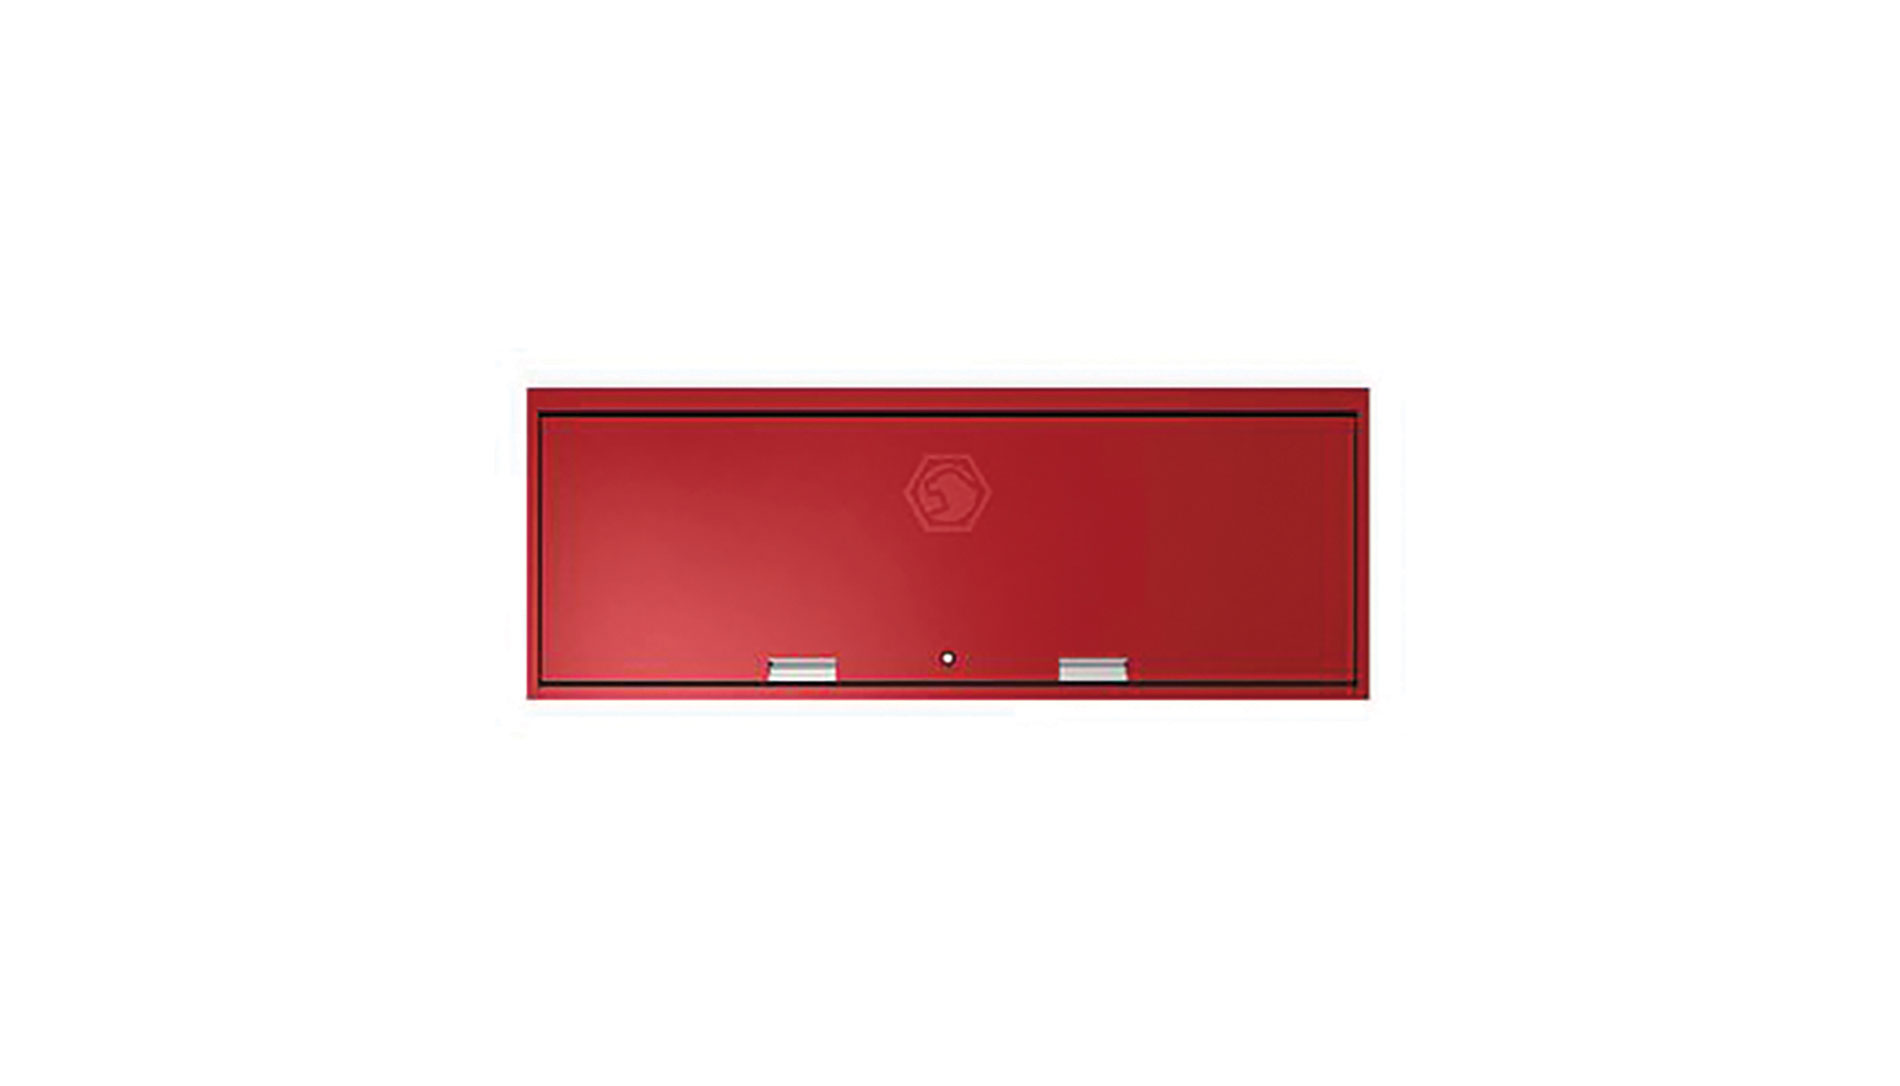 Red metal hutch. Image by Matco Tools.